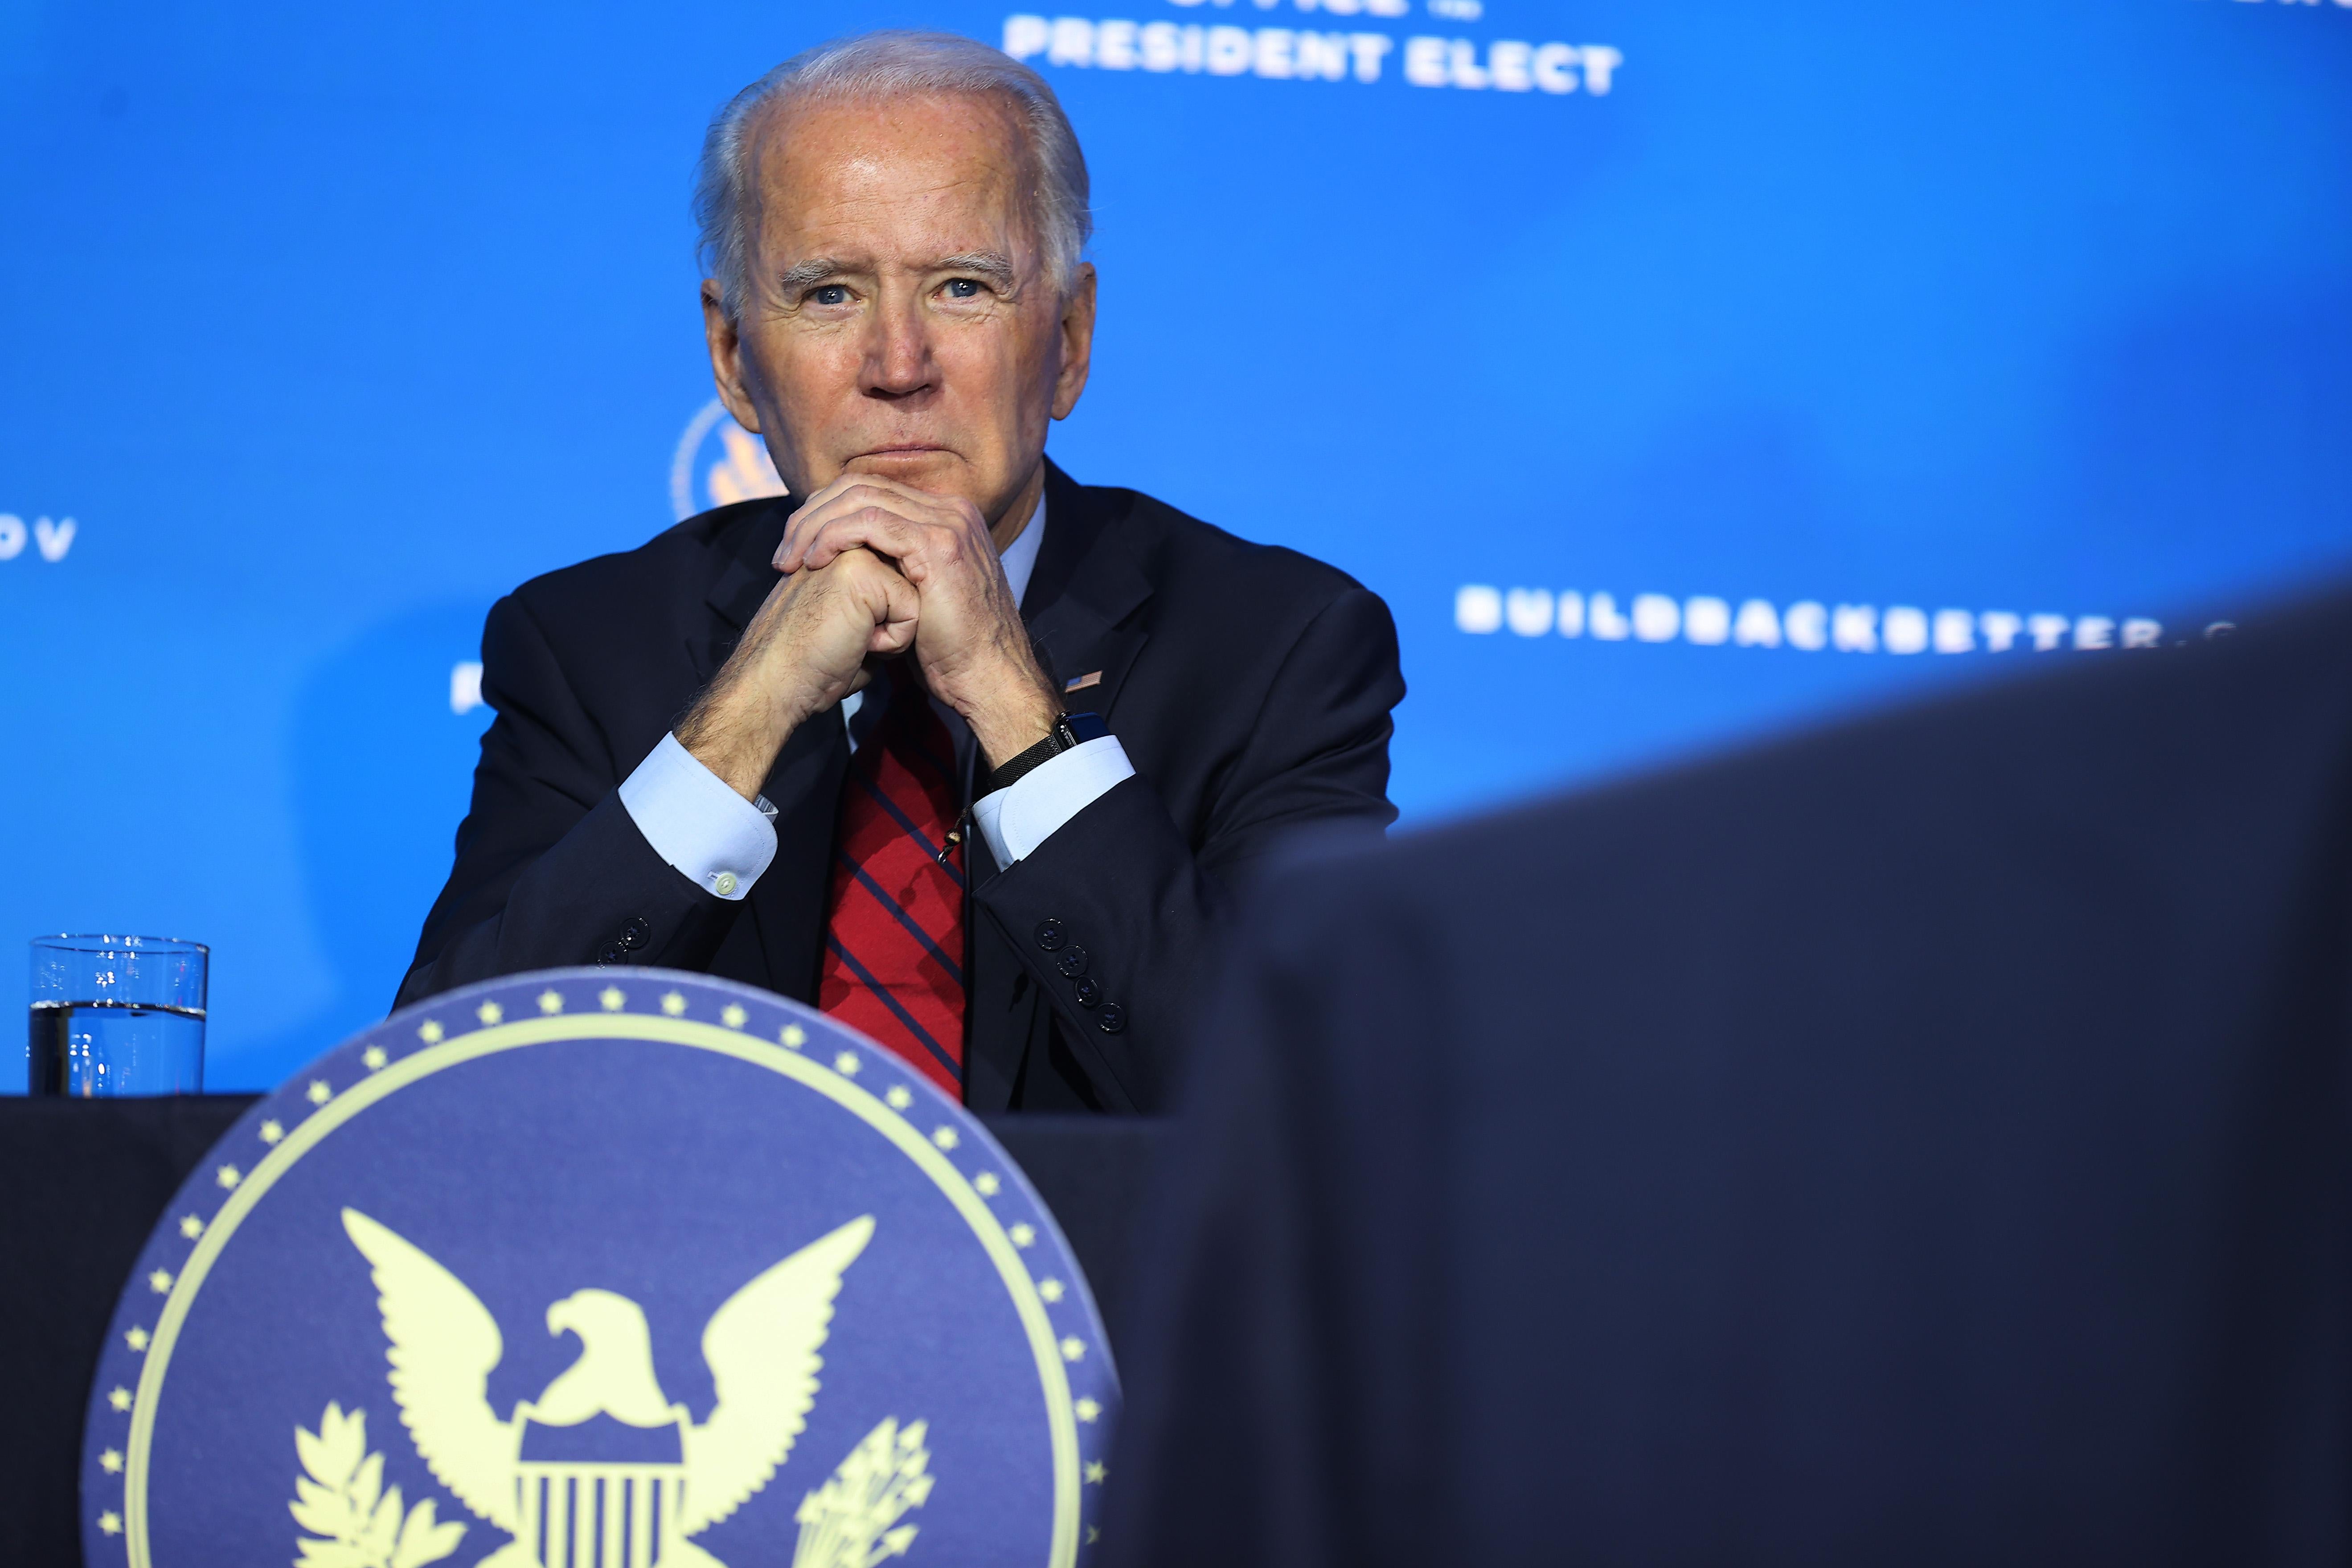 Biden sits with his elbows on a table and his hands clasped, with a presidential seal in front of him